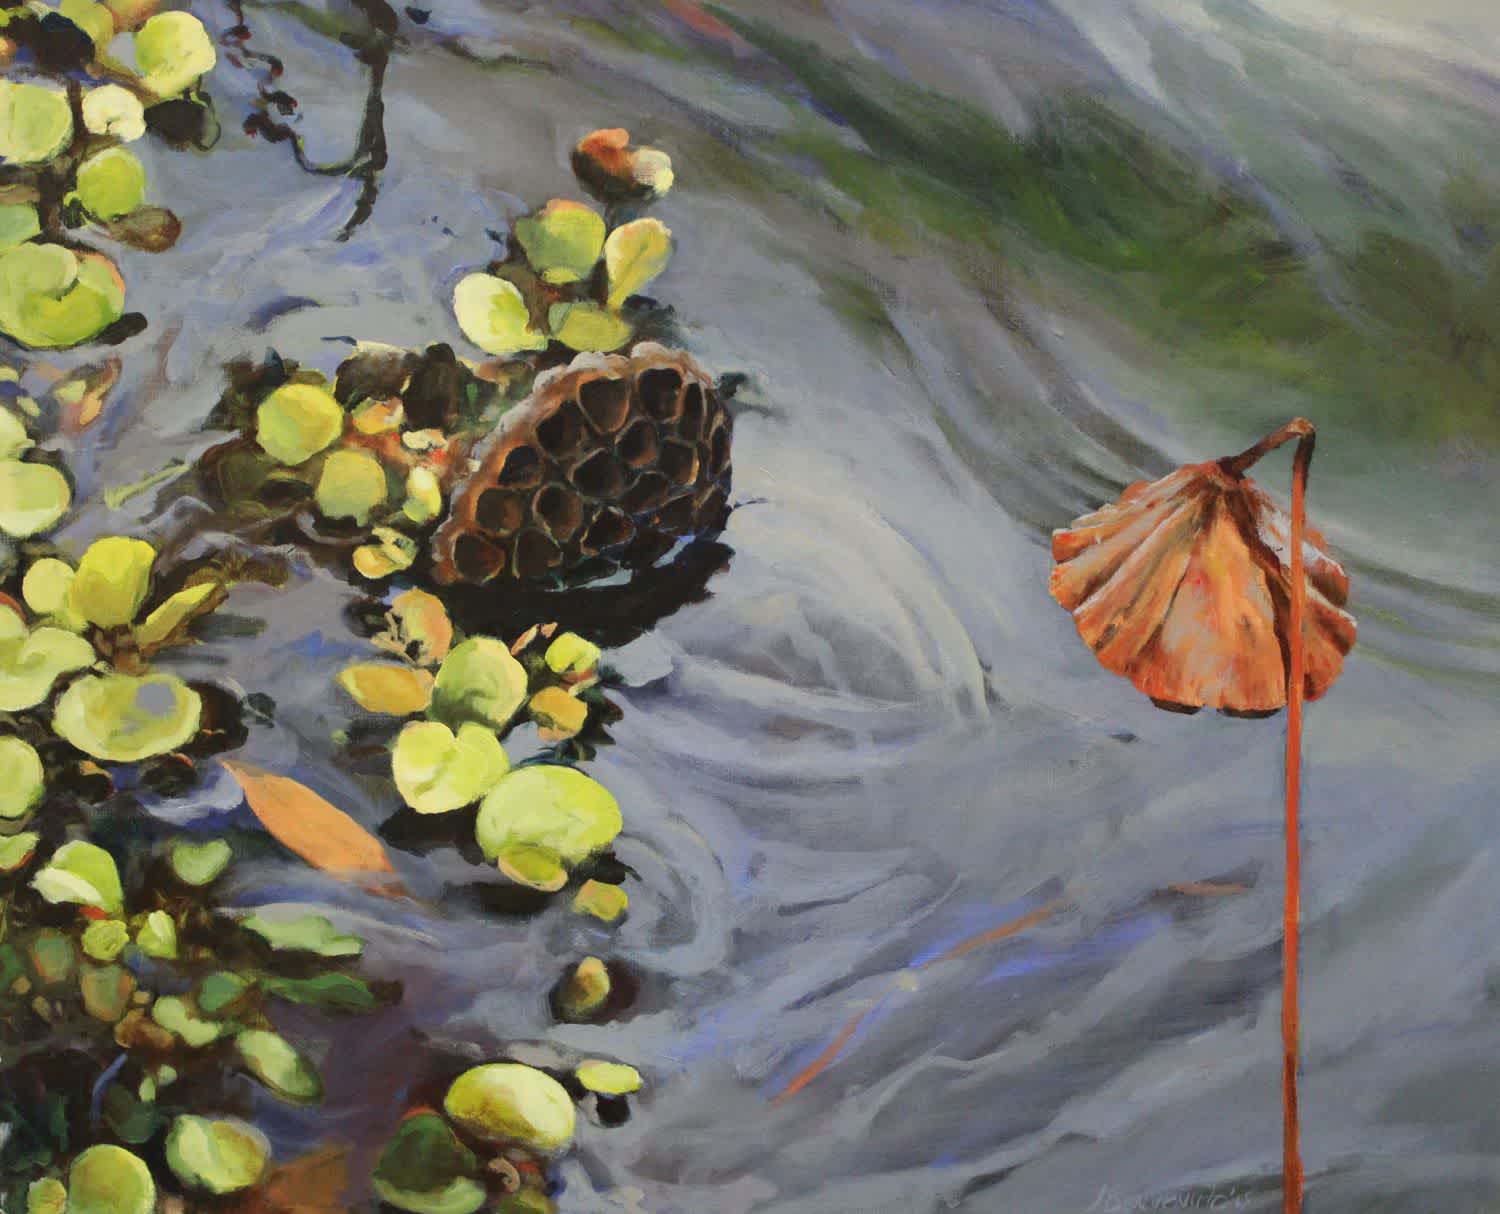 Painting of a calm water scene featuring a floating lotus pod. Painting by Jean Benvenuto for the exhibition Waterways at Virginia MOCA Satellite Gallery.